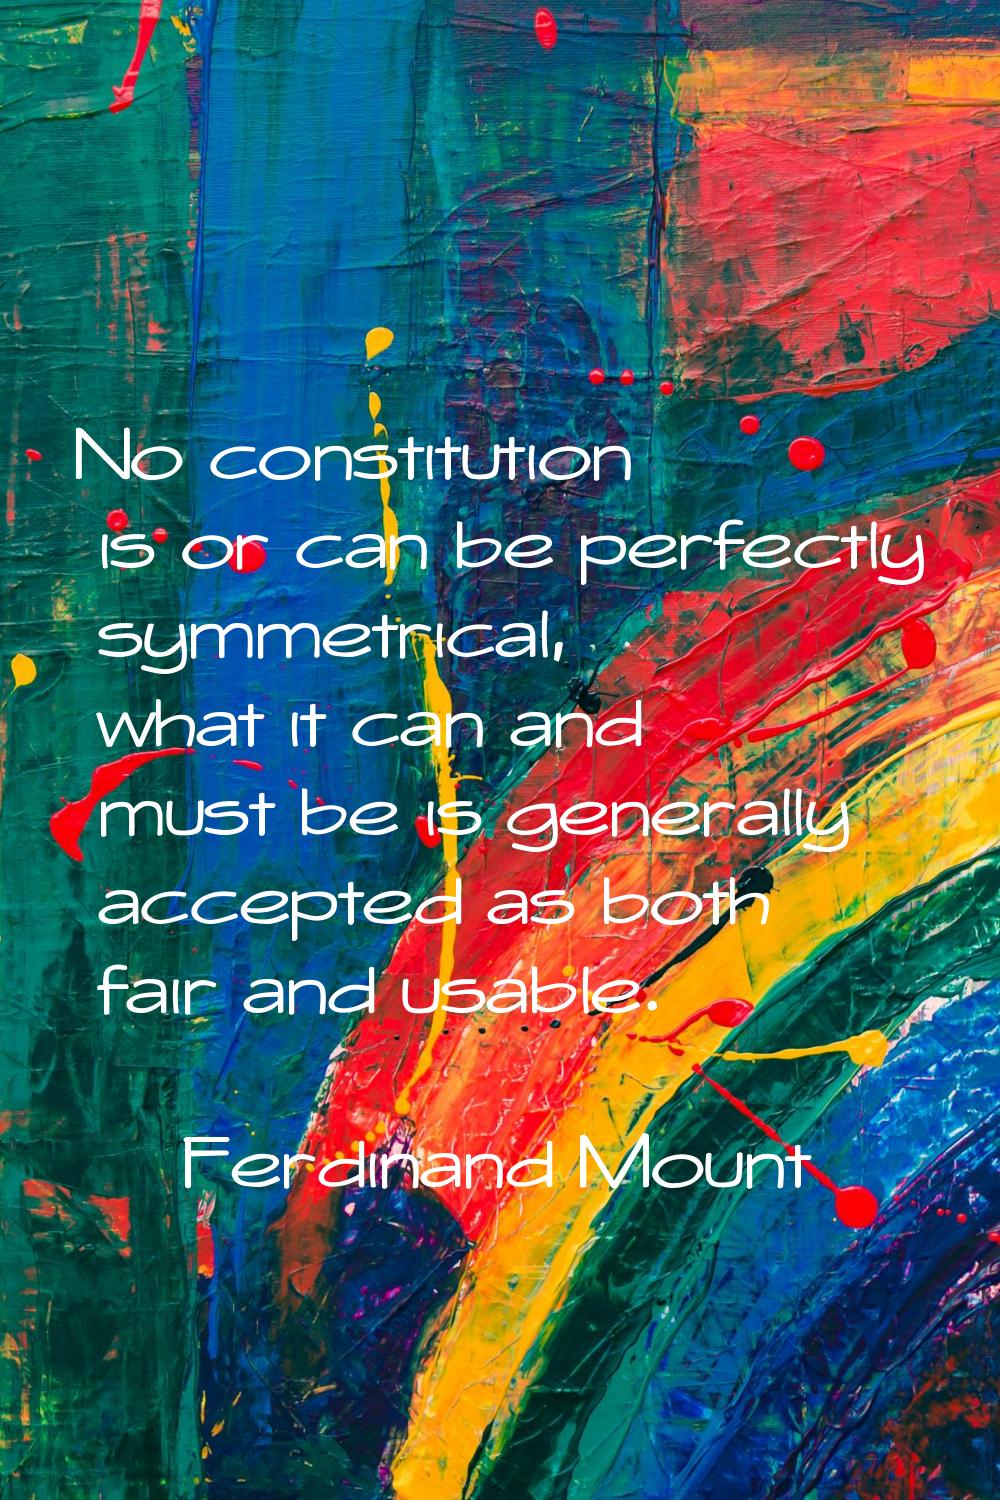 No constitution is or can be perfectly symmetrical, what it can and must be is generally accepted a